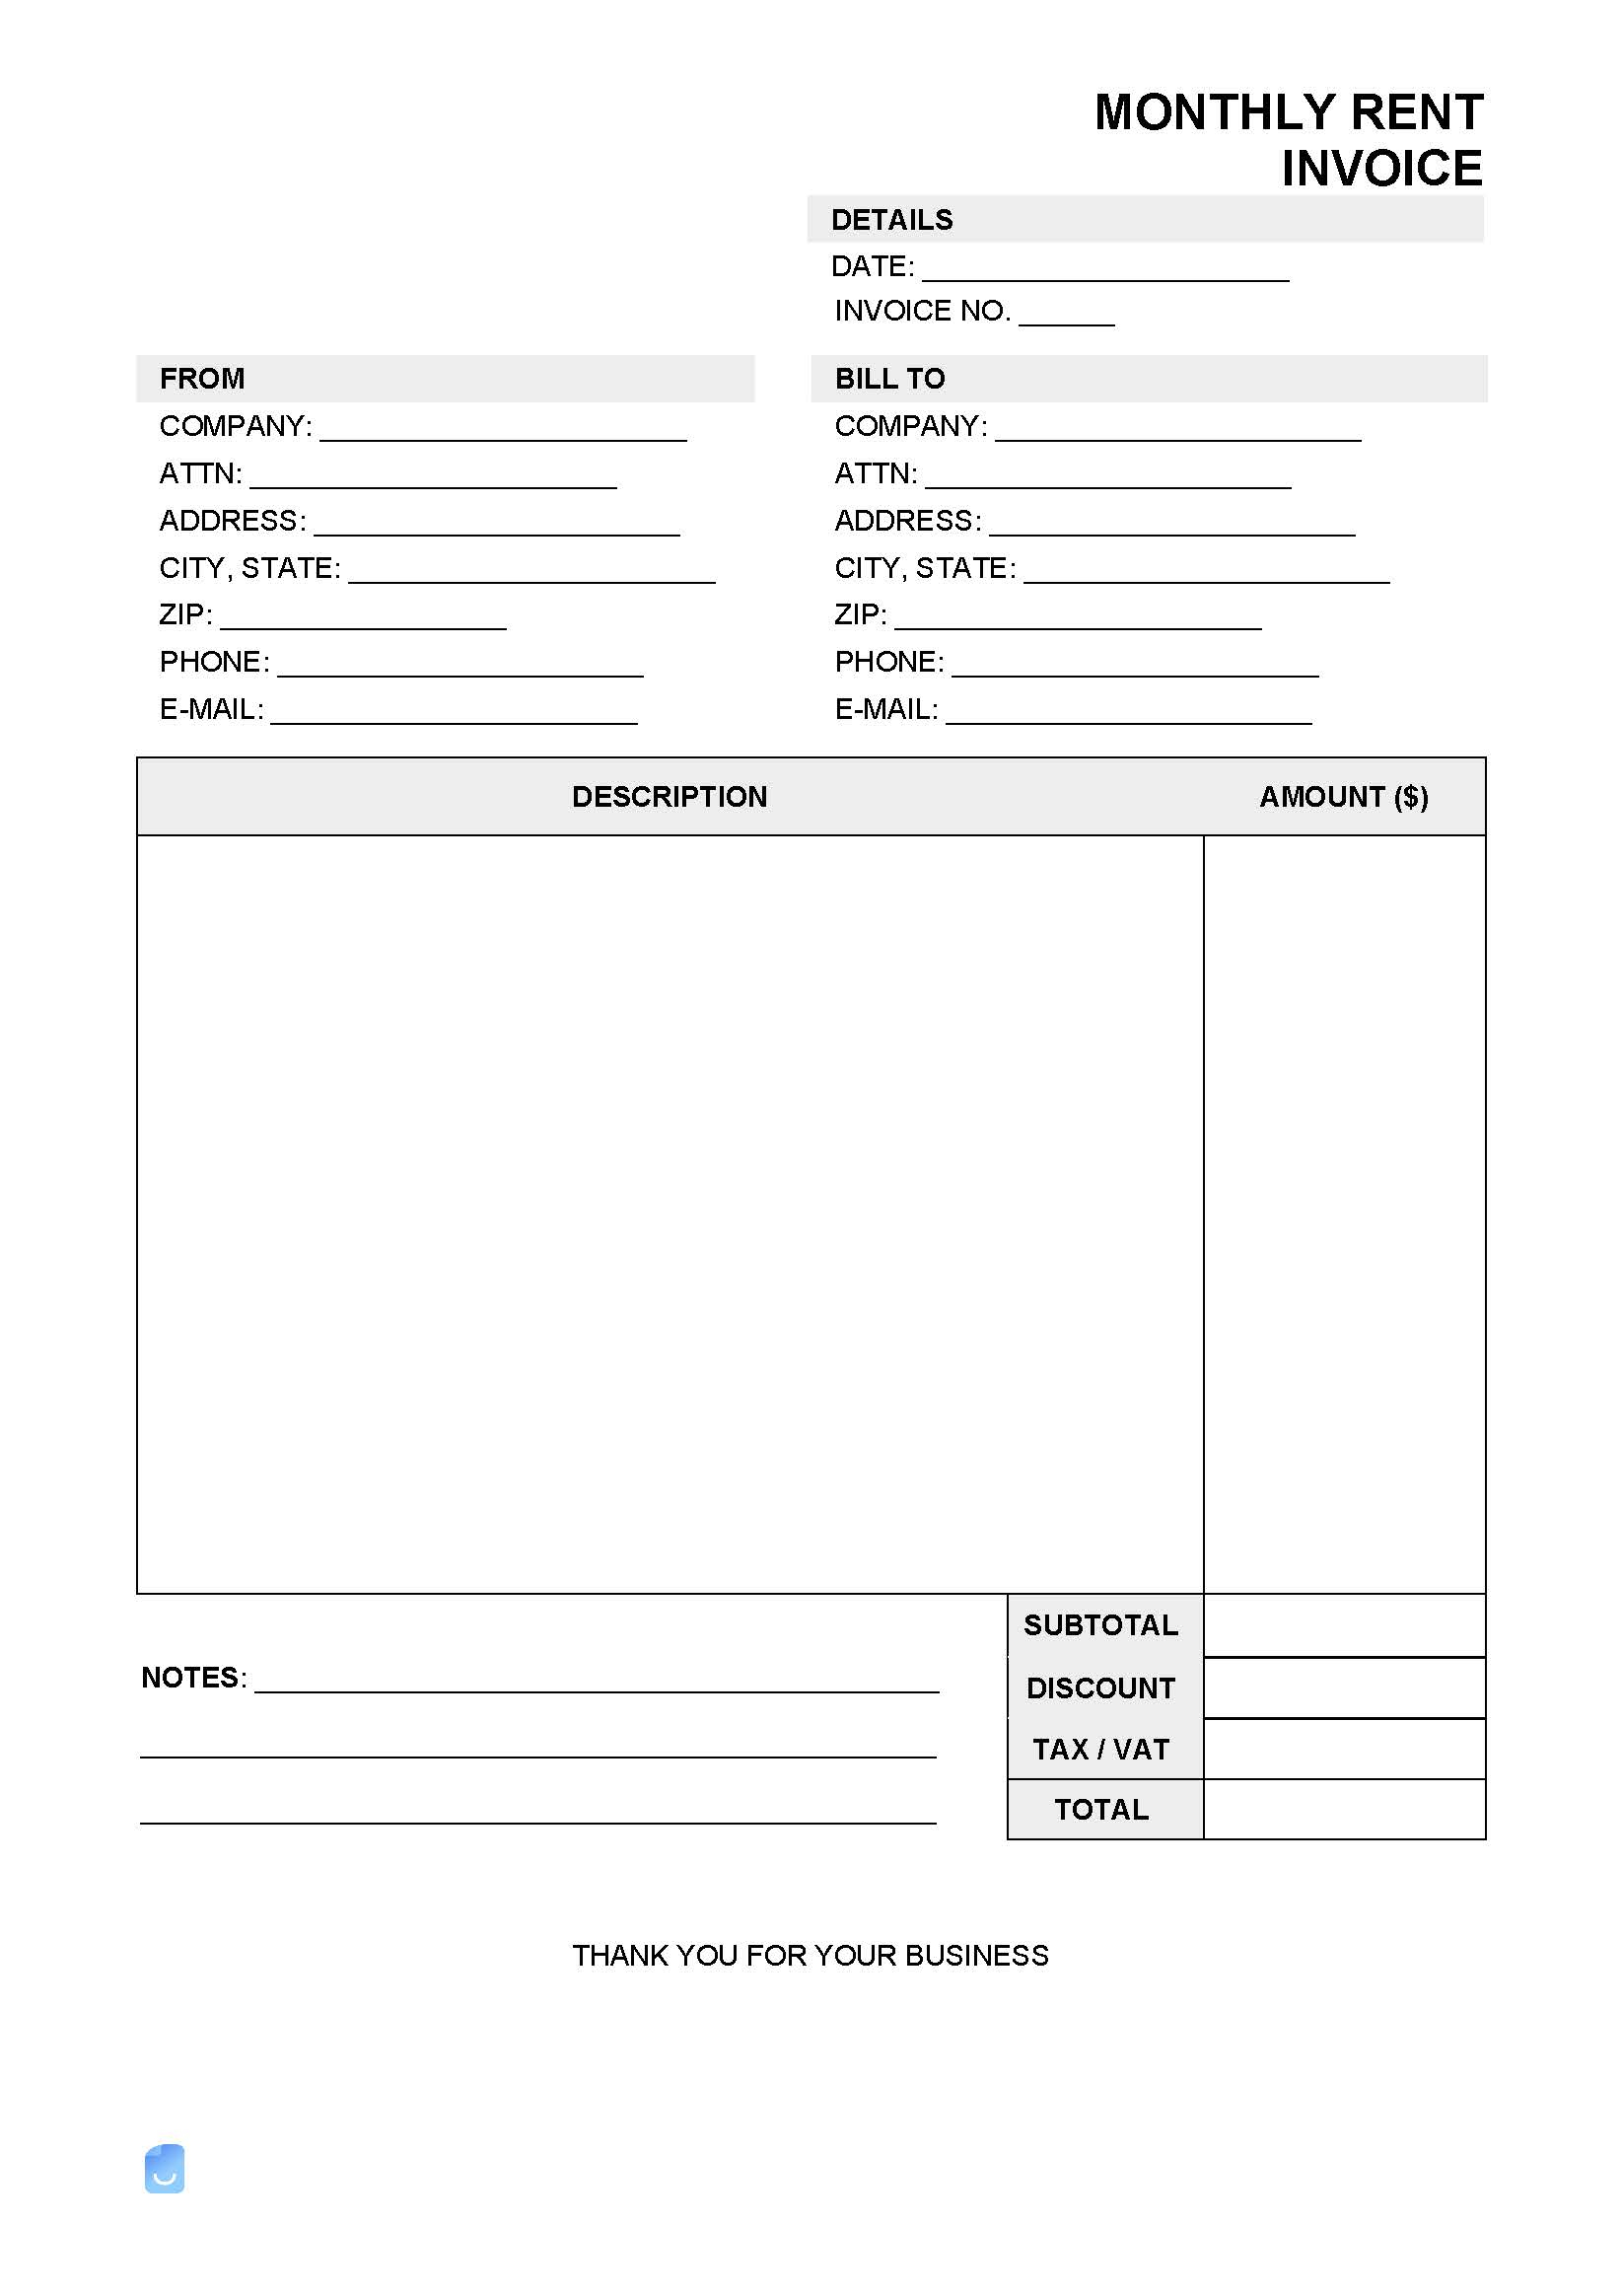 Monthly Rent (Lease) Invoice Template | Invoice Maker With Regard To Invoice Template For Rent